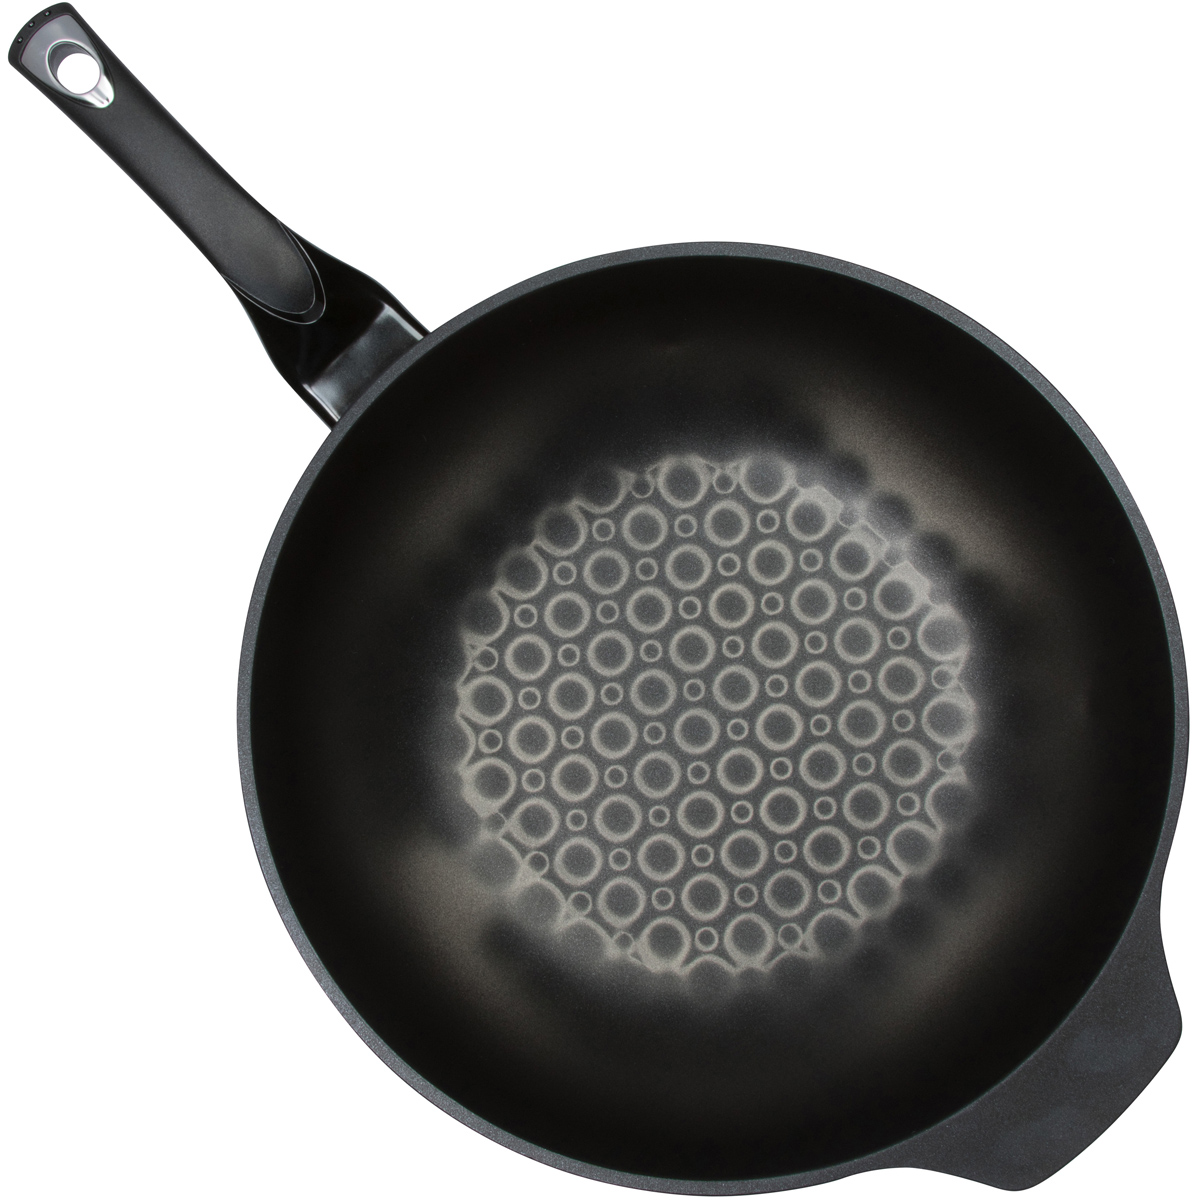 3D Marble Non-Scratch, Non-Stick Coating Fry Pan, Made in Korea. (32cm)